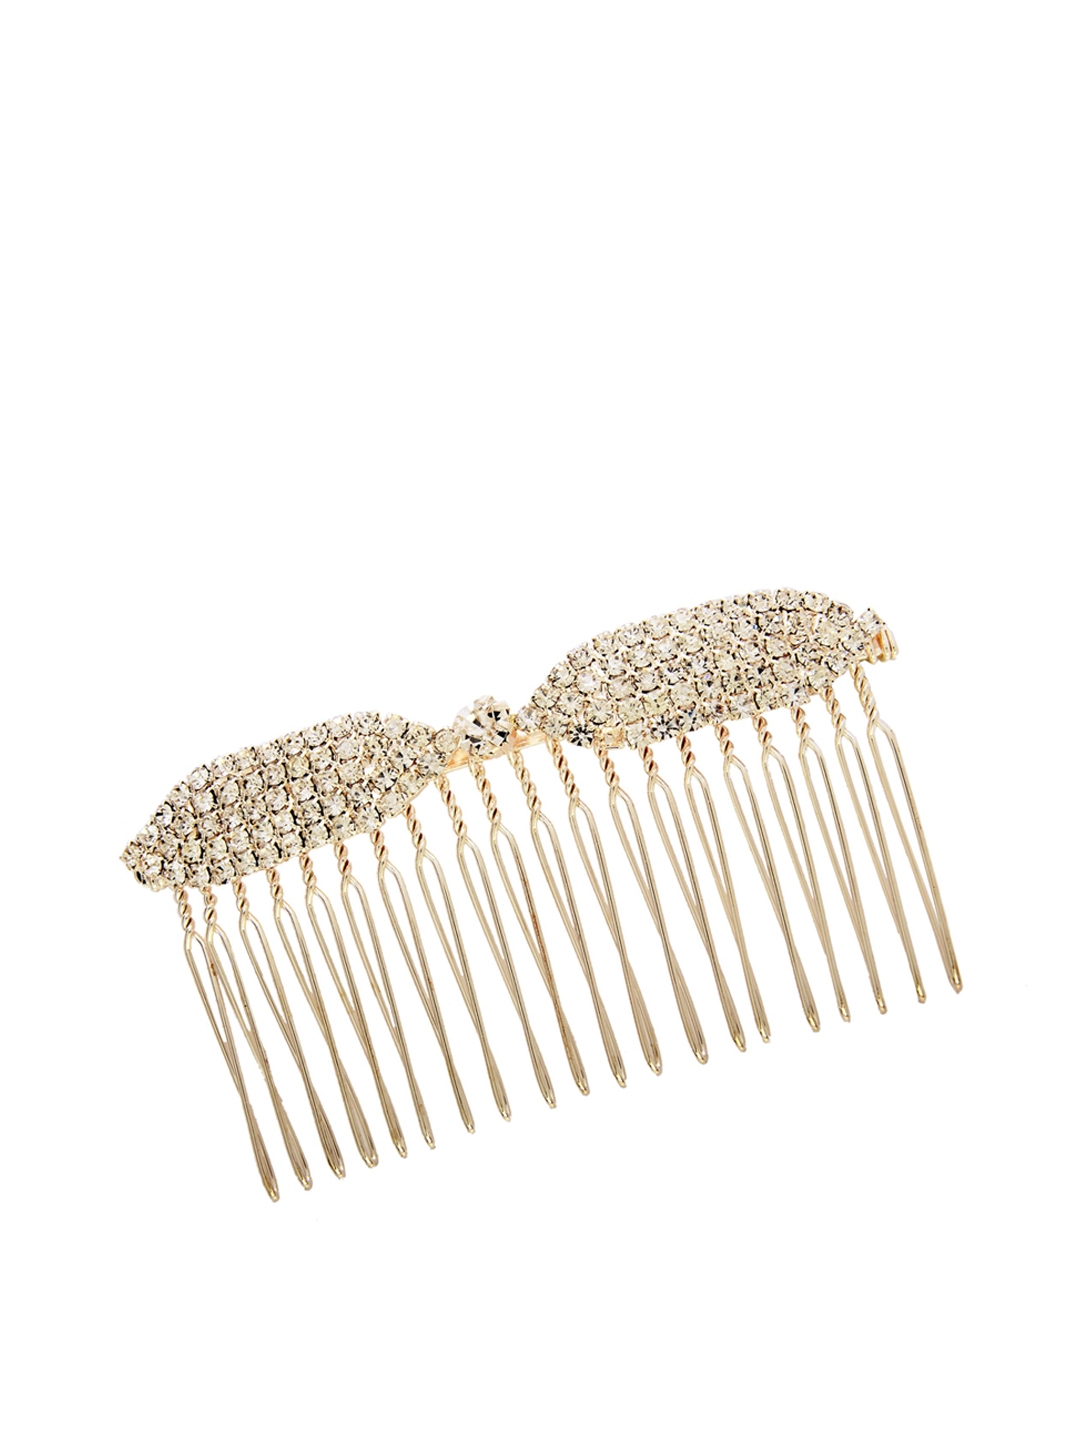 Buy 20Dresses Gold Toned Hair Comb - Hair Accessory for Women 814053 ...